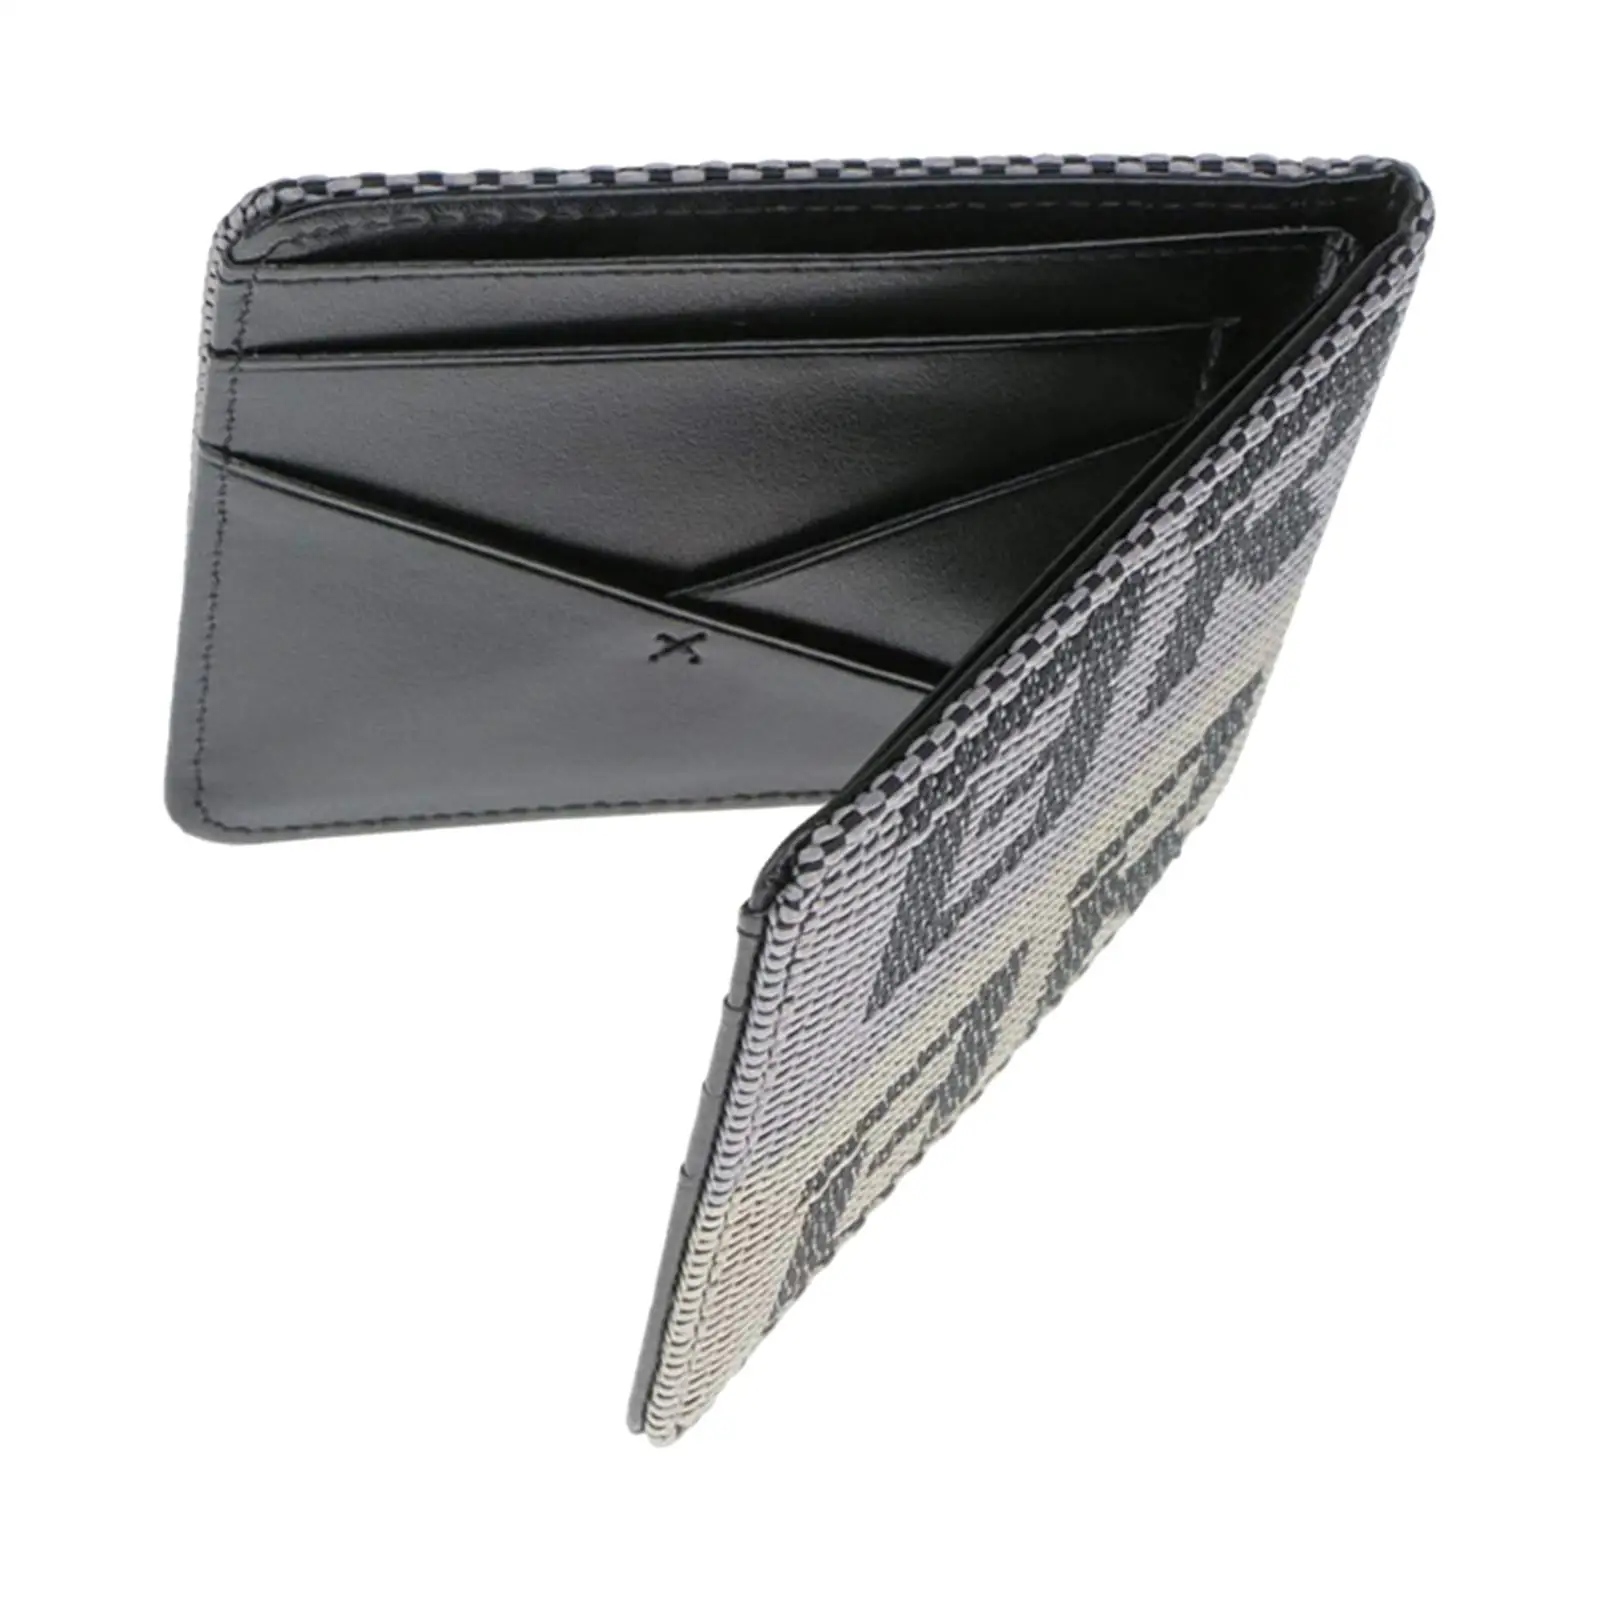 [Unbranded product] JDM Racing Foldable Credit Card Business Card